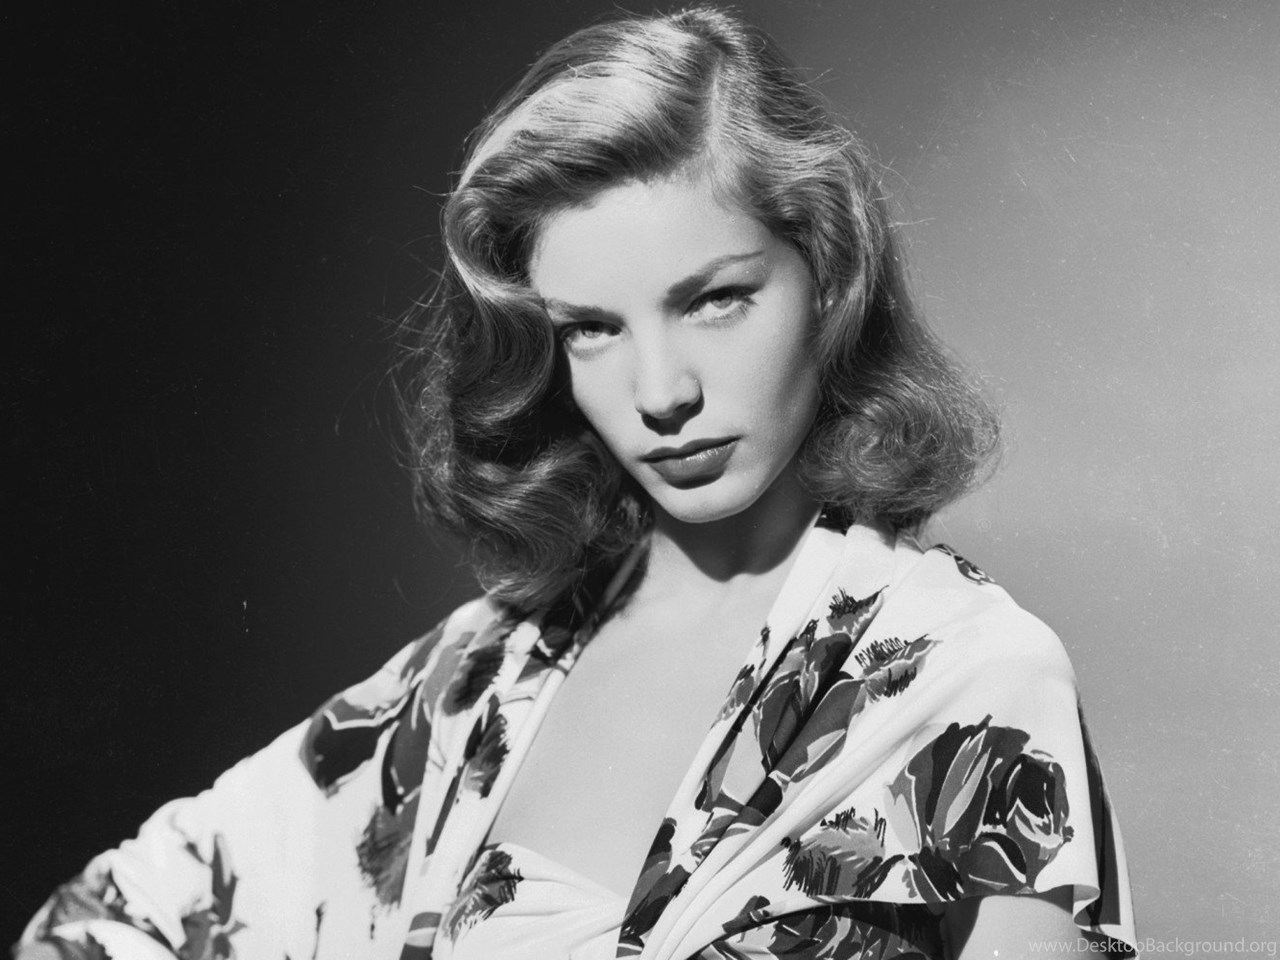 Download A Look Back At Lauren Bacall's Most Glamorous Moments Fullscr...